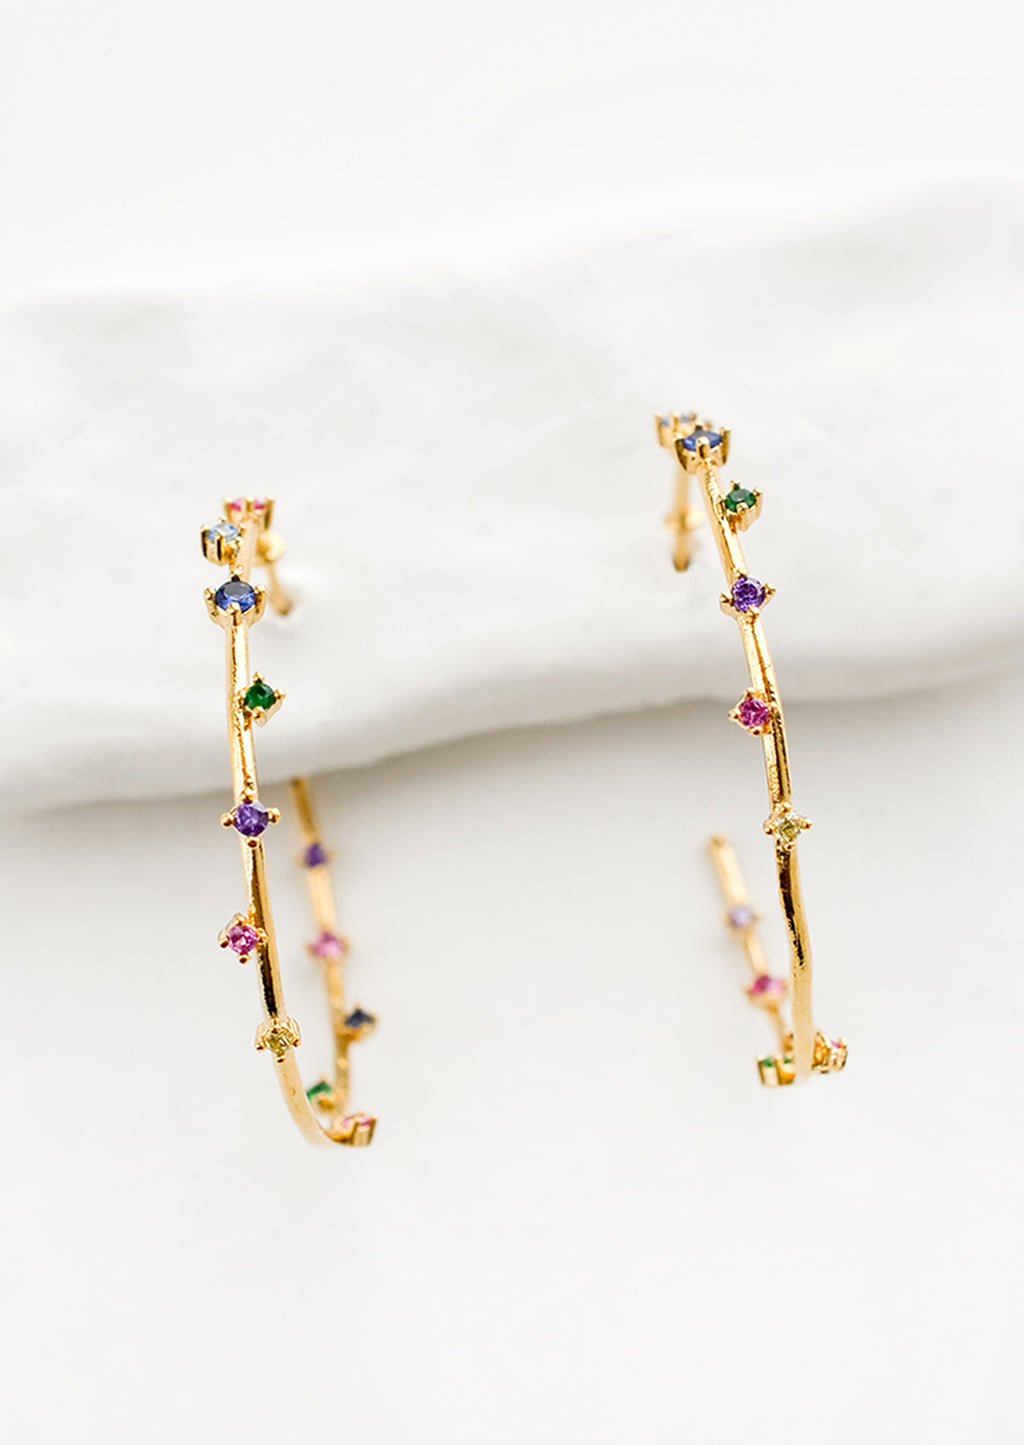 1: A pair of gold hoop earrings with colored crystals wrapping around the hoop sporadically.